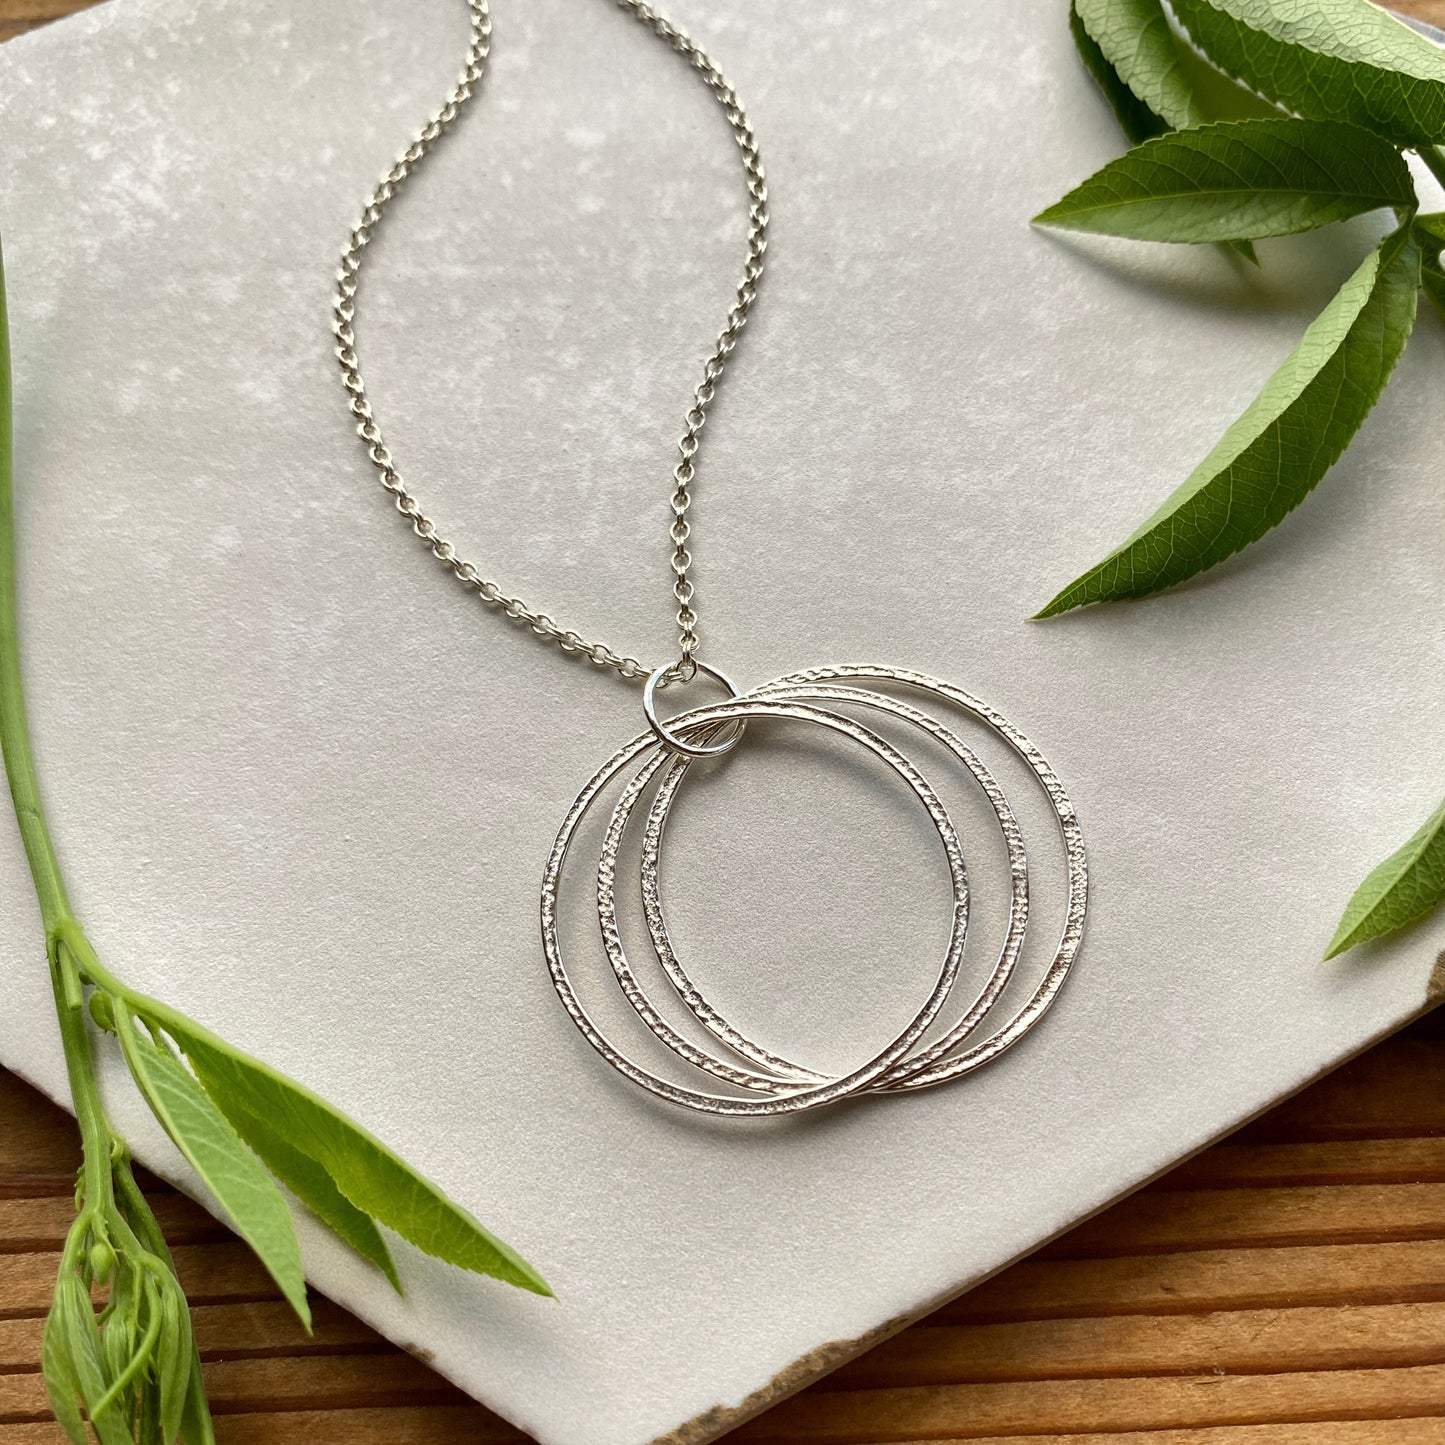 30th Birthday Milestone Necklace, Bold Sterling Silver Sparkly Circles Pendant, 3 Rings for 3 Decades, Large 3 Circle Pendant